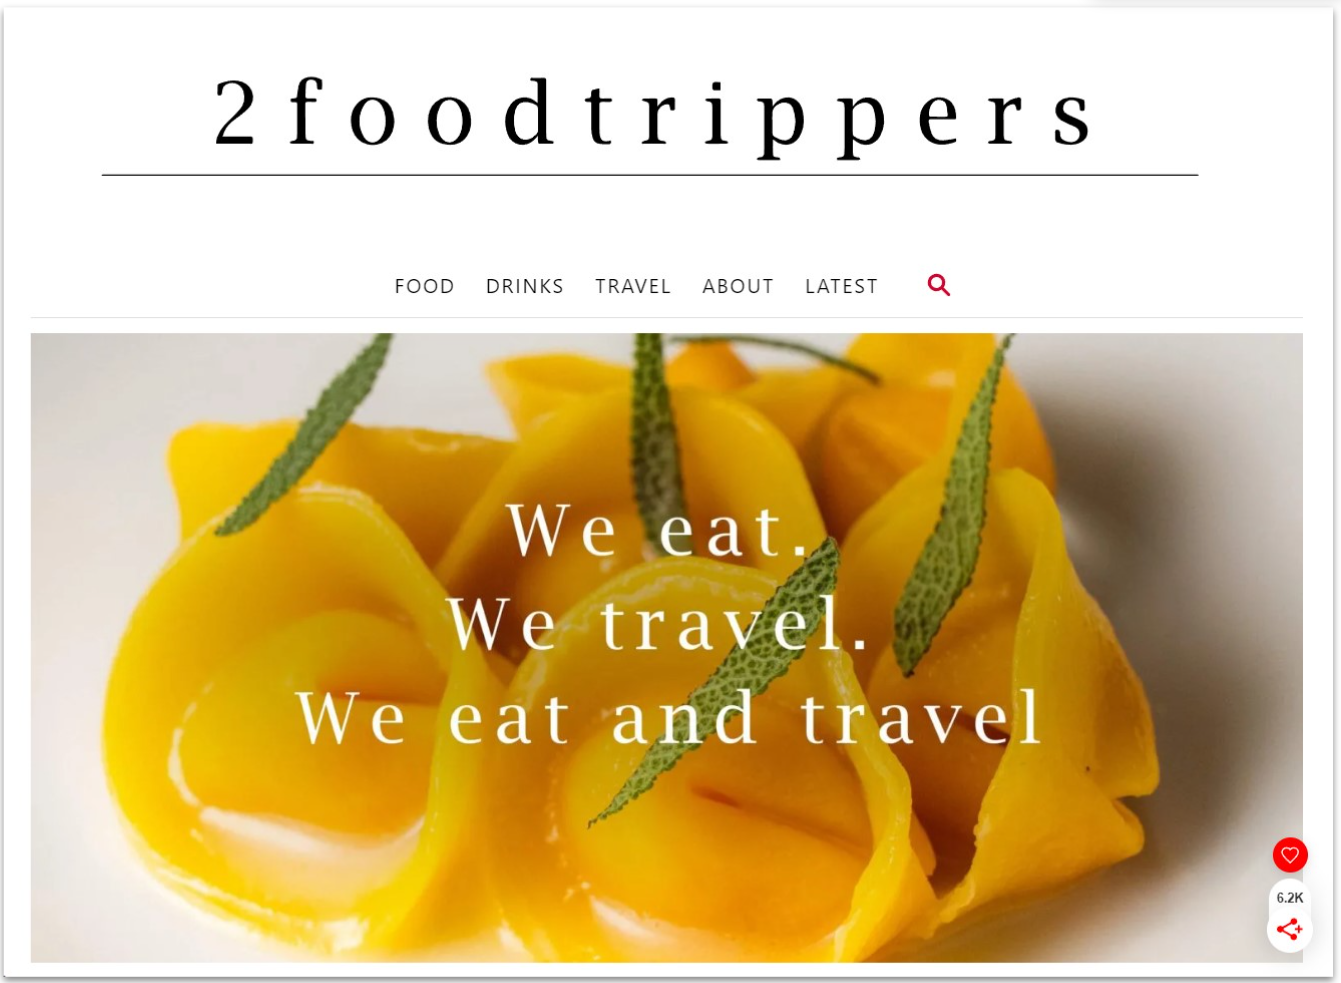 2foodtrippers food travel blog landing page featuring image of yellow filled pasta with herb garnish